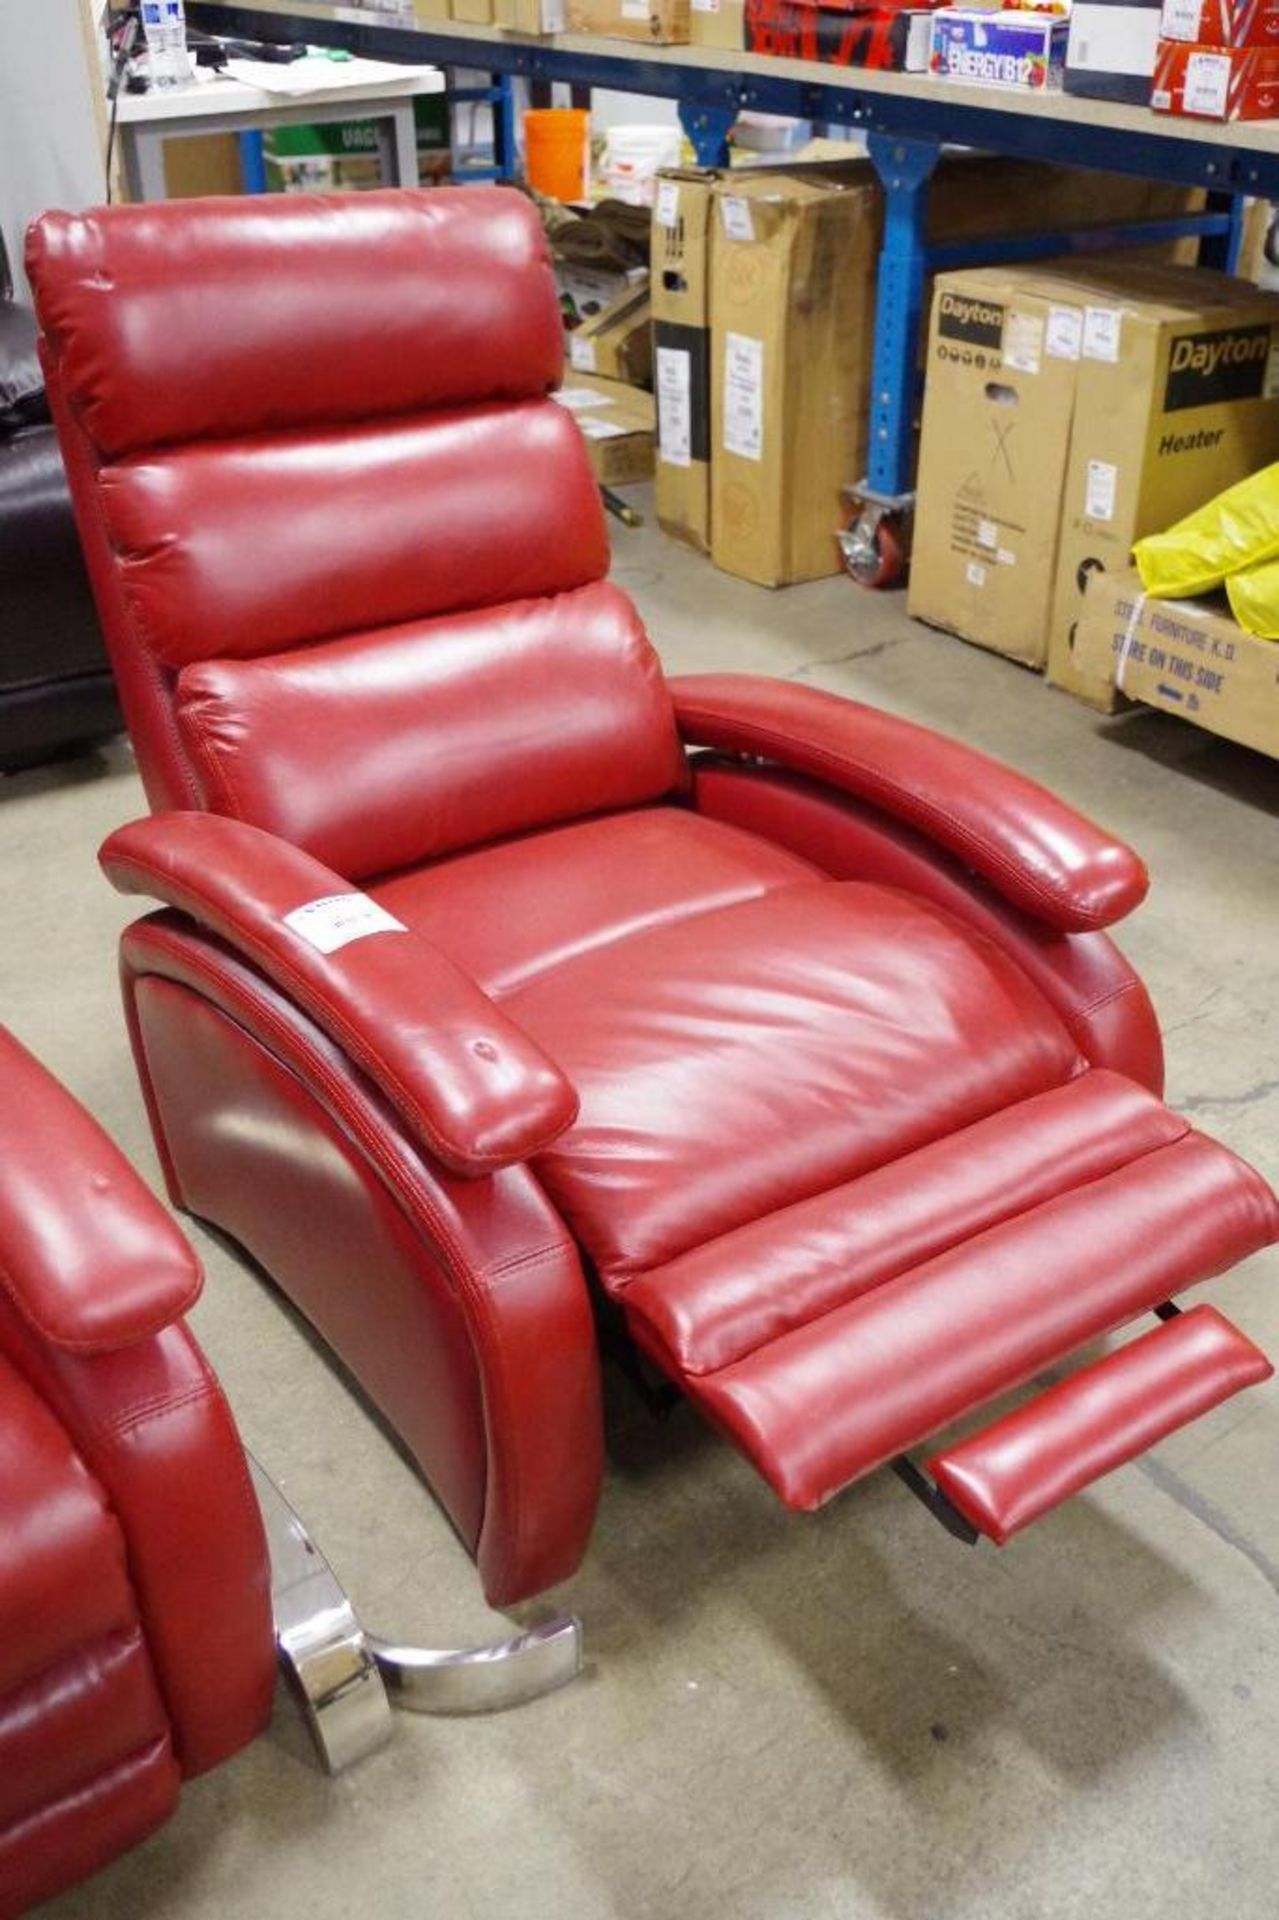 BARCALOUNGER PEGASUS Red Leather Recliner Wholesale Price: $400 each - Image 2 of 4